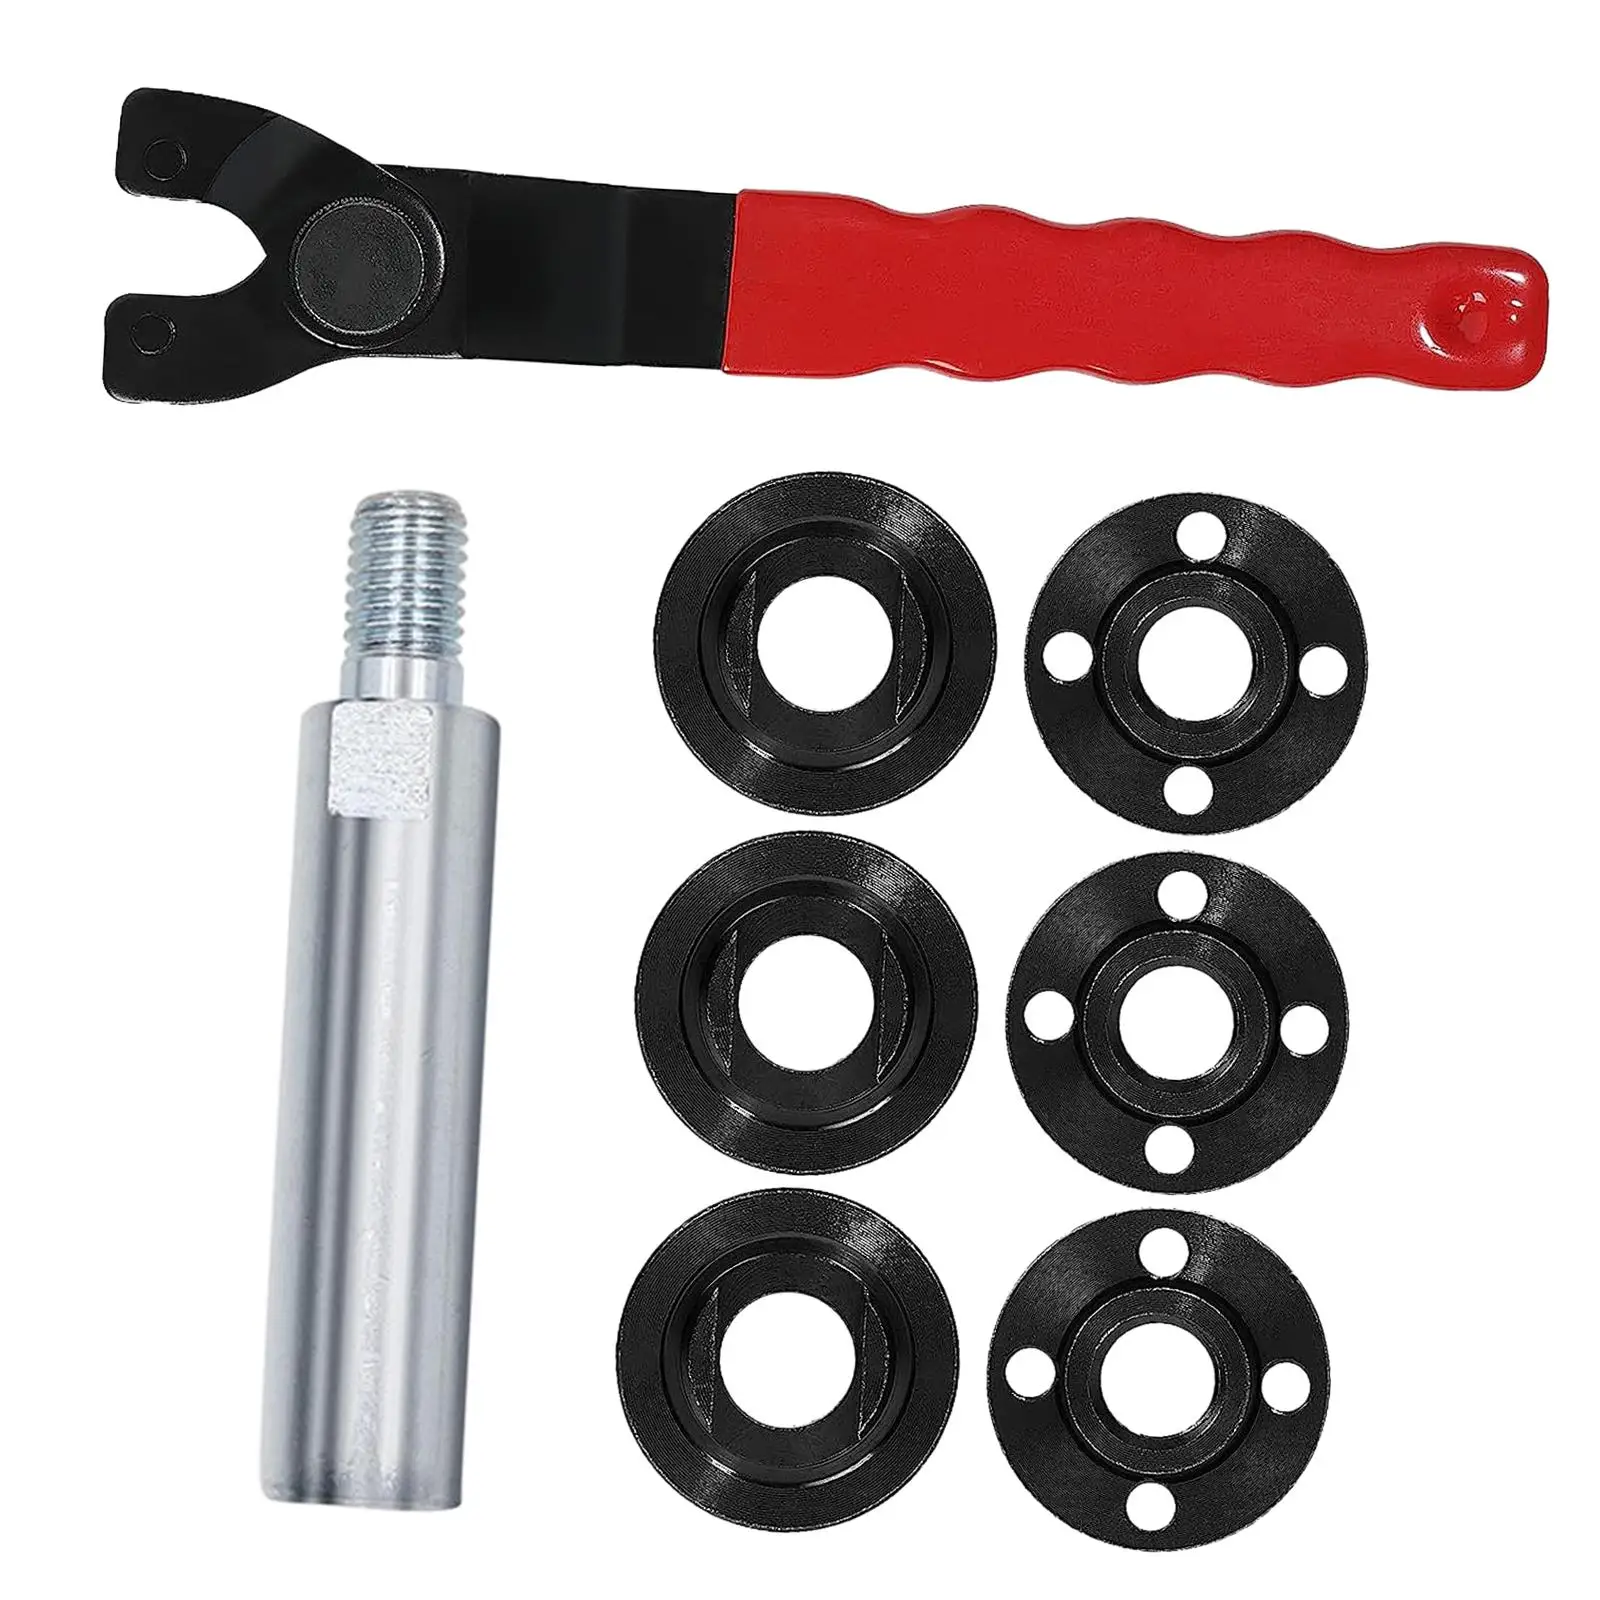 Pin Wrench Nuts Flange Grinder Wrench Home Wrenches Angle Grinder Wrench